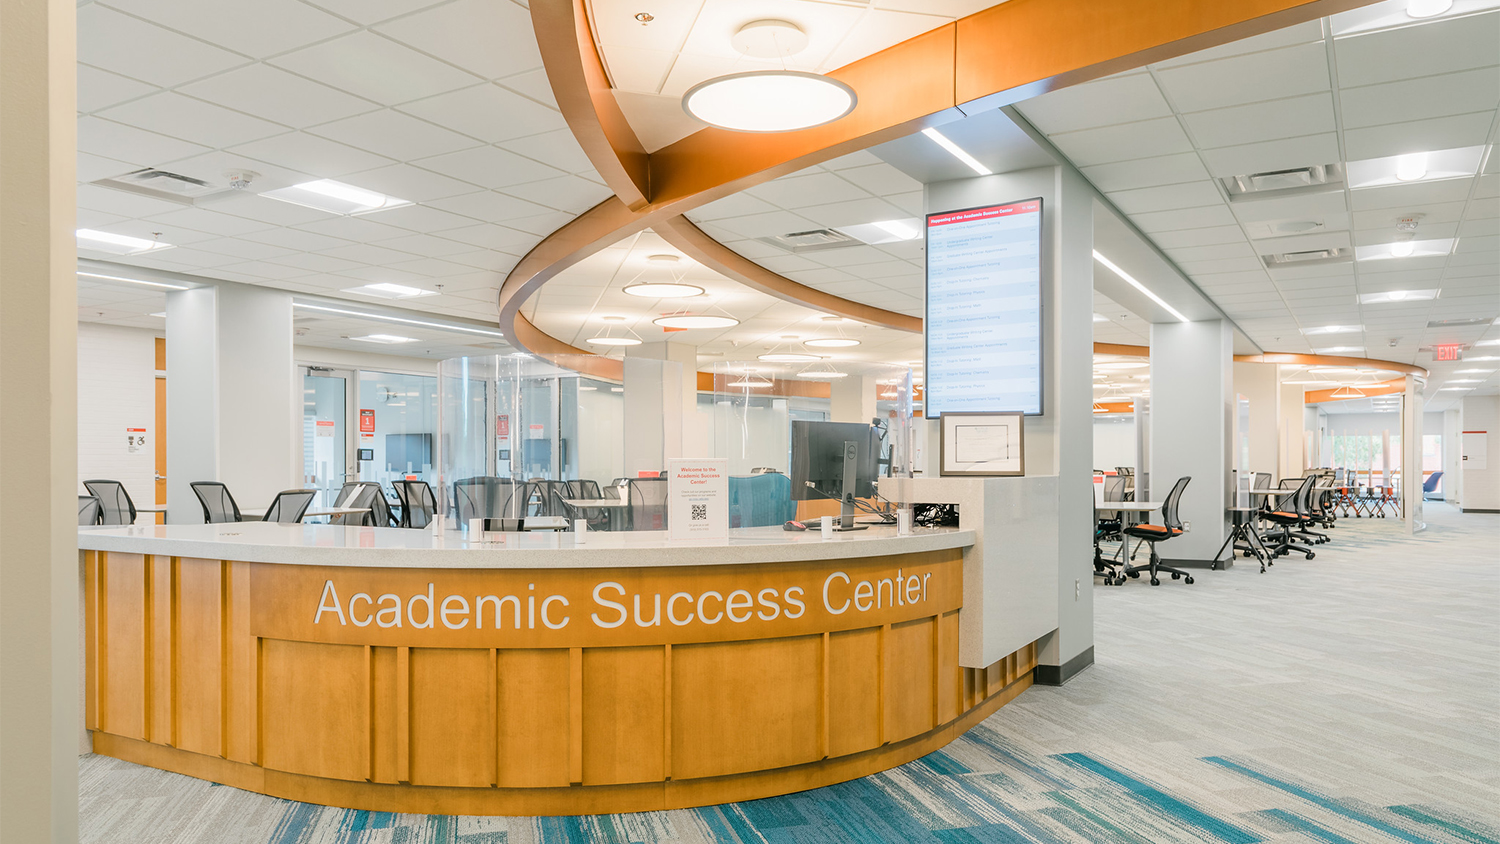 The main desk of the Academic Success Center